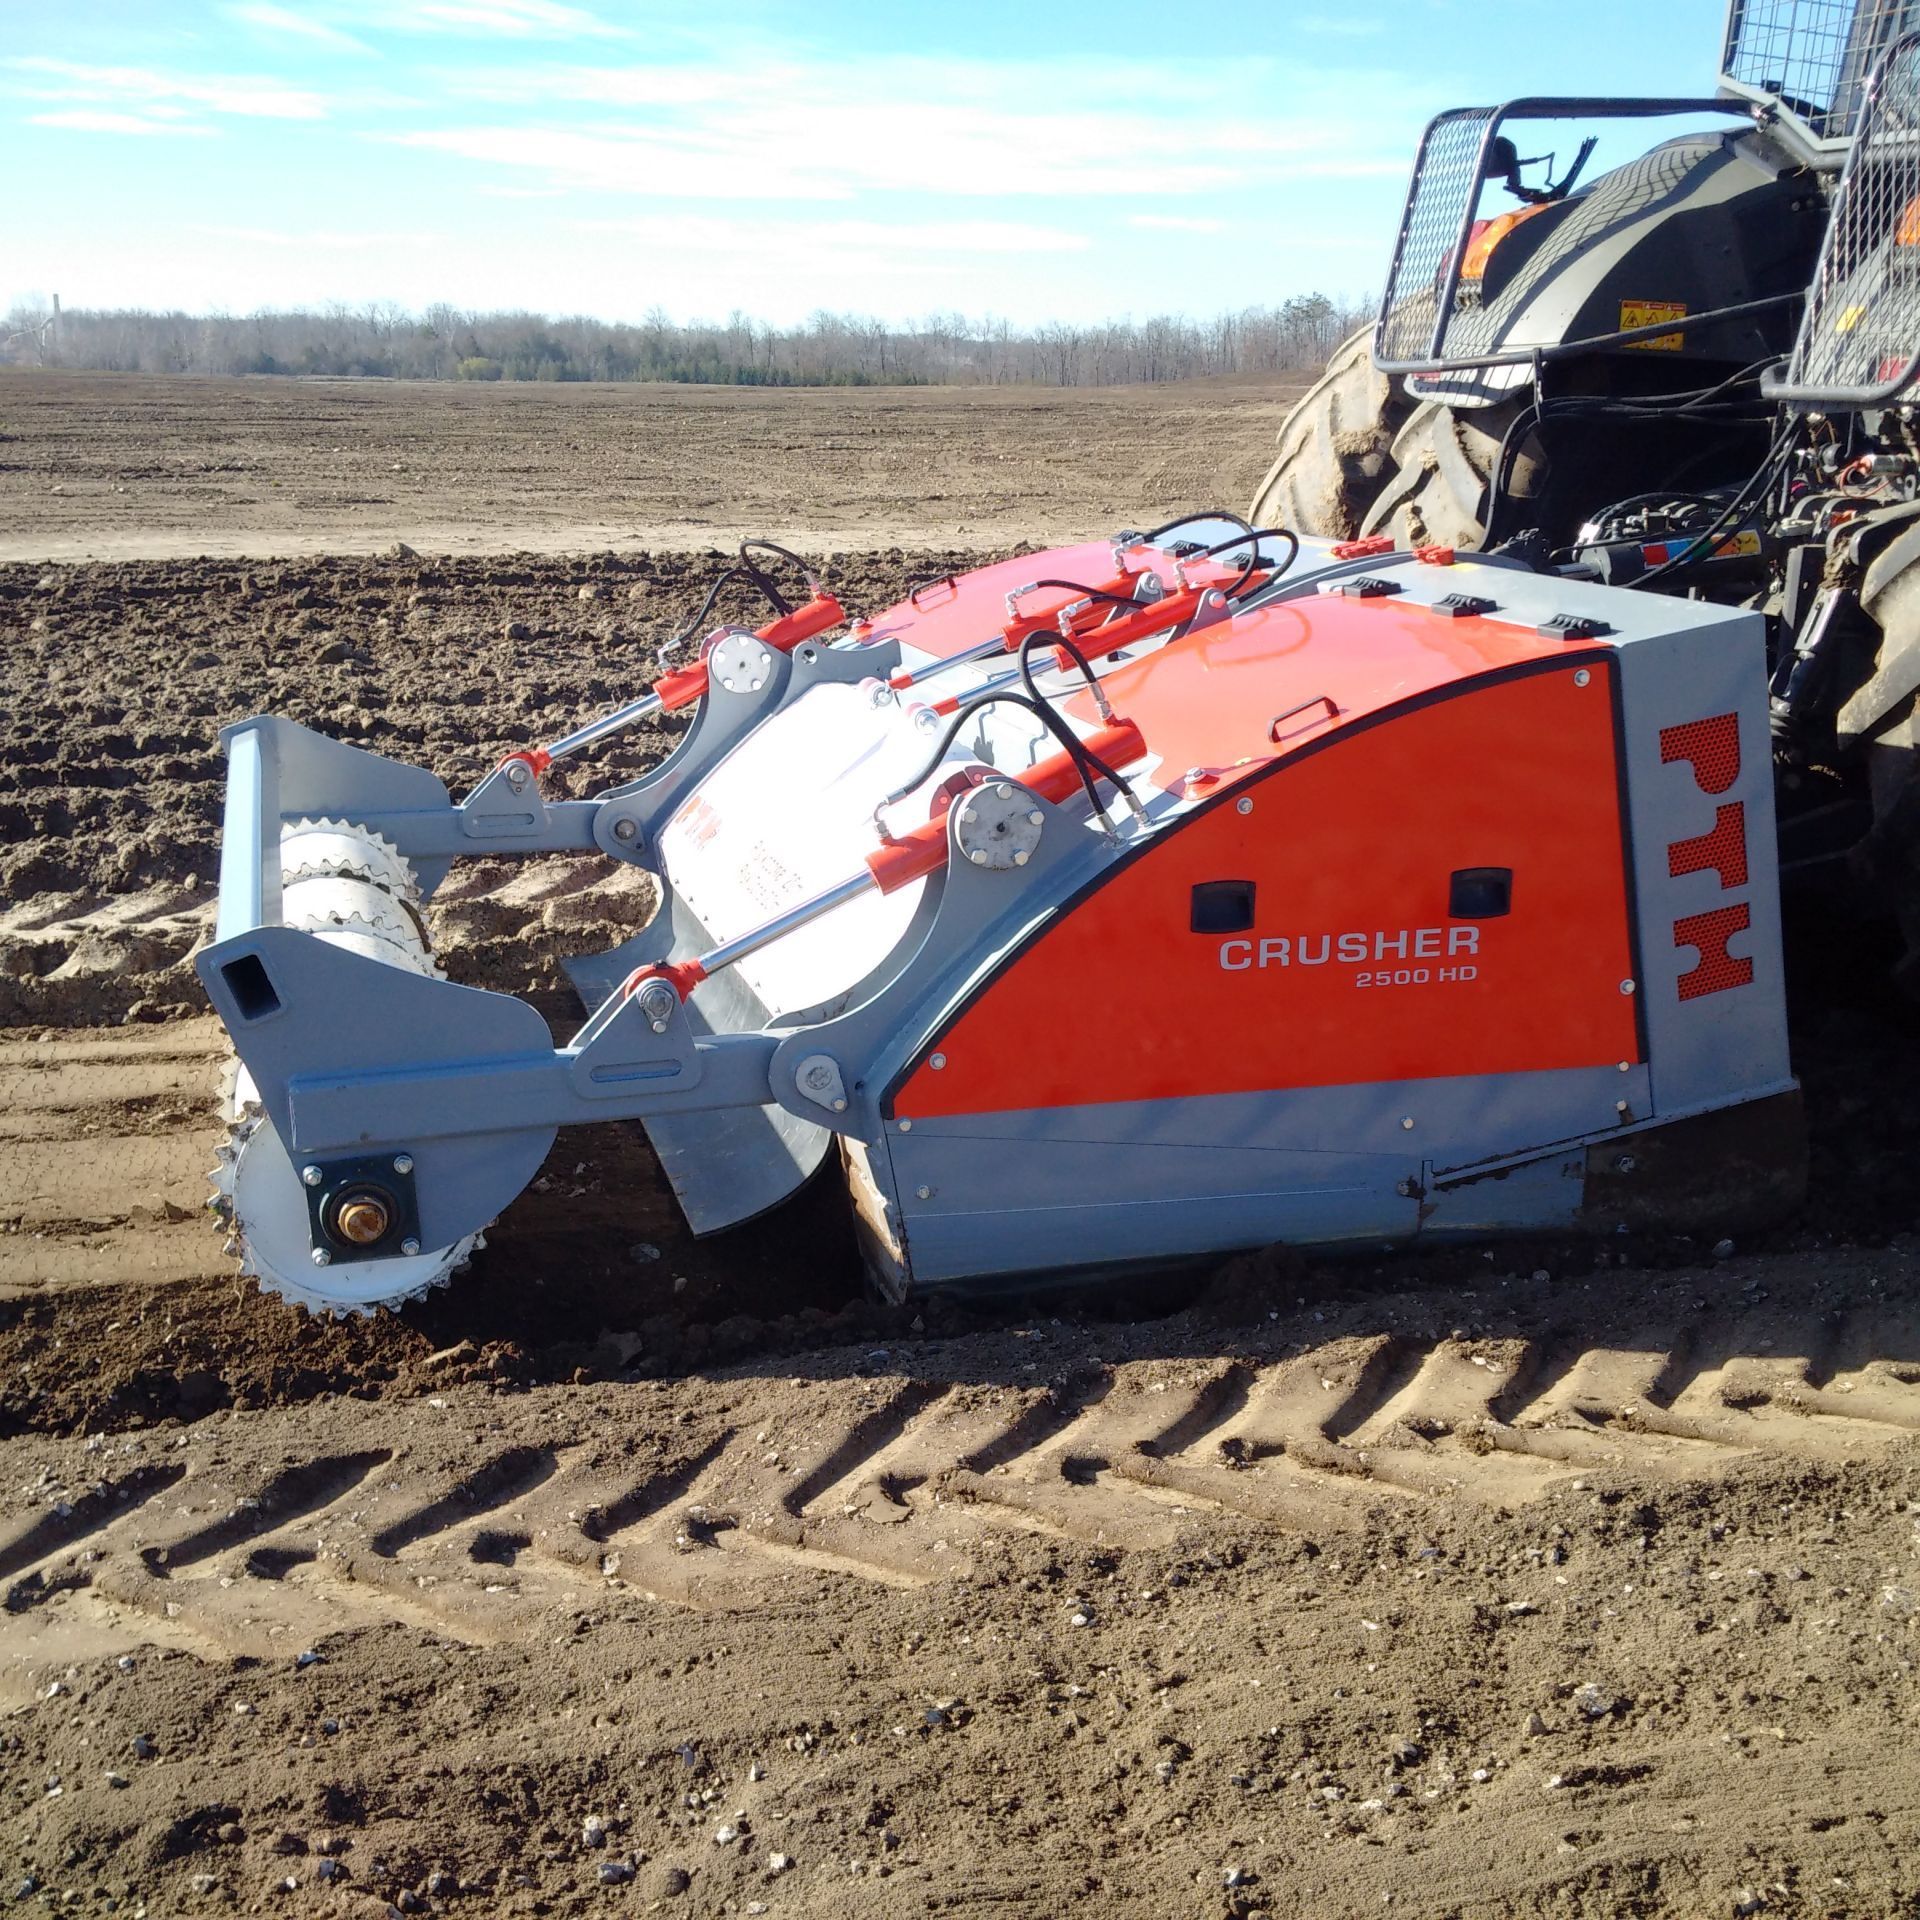 An orange and gray machine with the word crusher on it